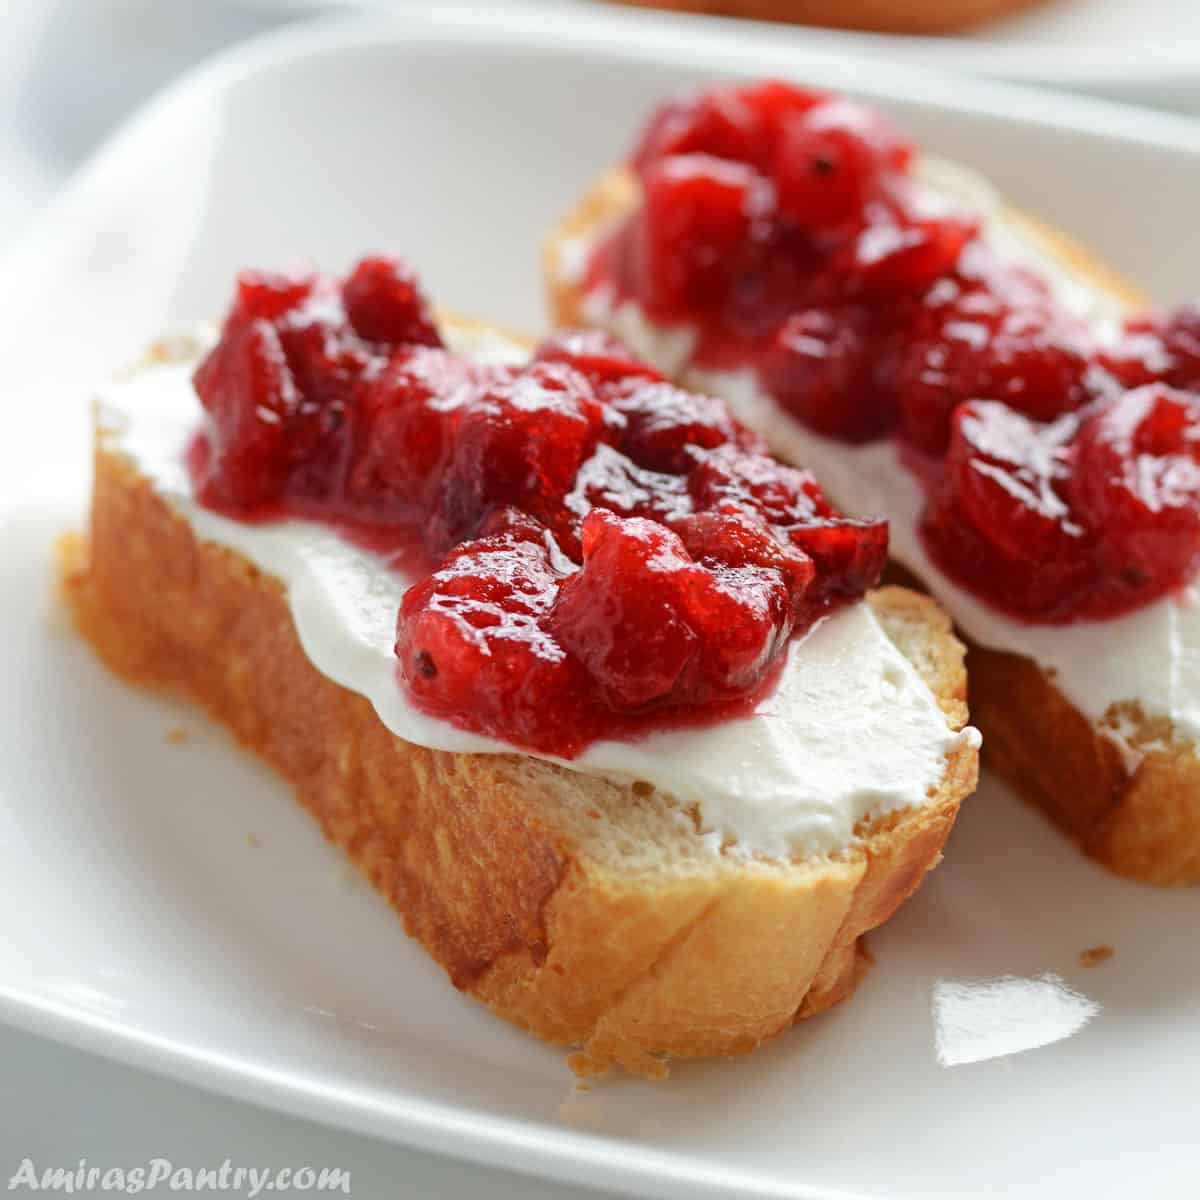 Cranberry sauce spread over toast and placed on a white plate.